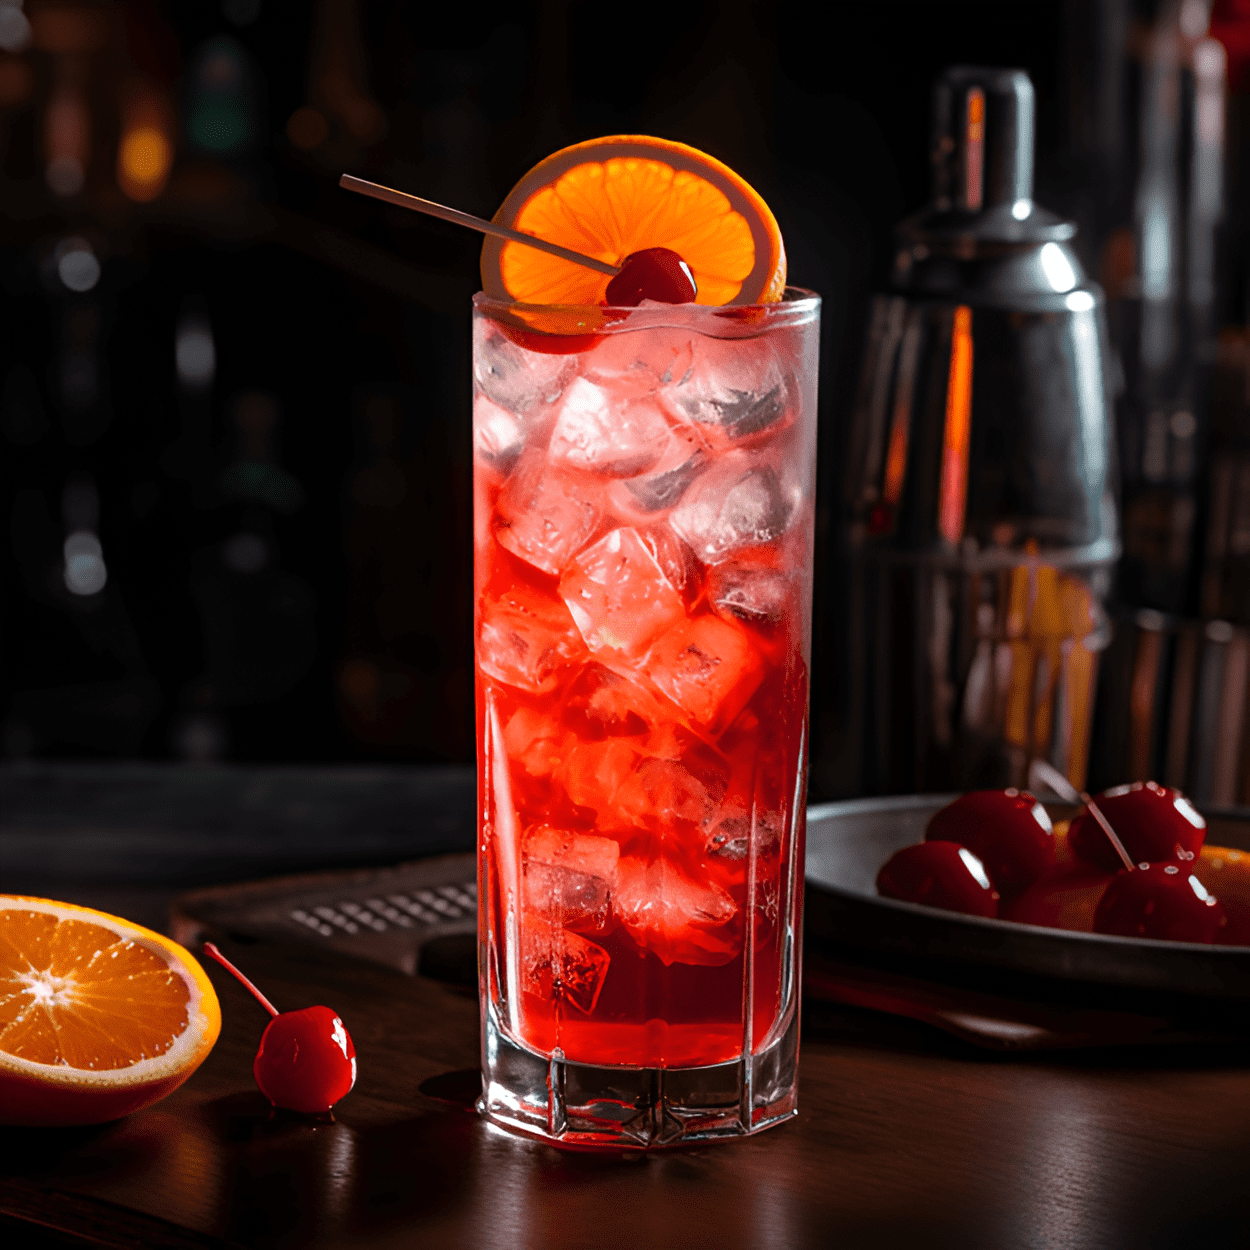 Sex In The Woods Cocktail Recipe - This cocktail has a sweet and fruity taste with a hint of tartness. The combination of peach schnapps and cranberry juice gives it a unique flavor profile. It's light and refreshing, making it perfect for a hot summer day.